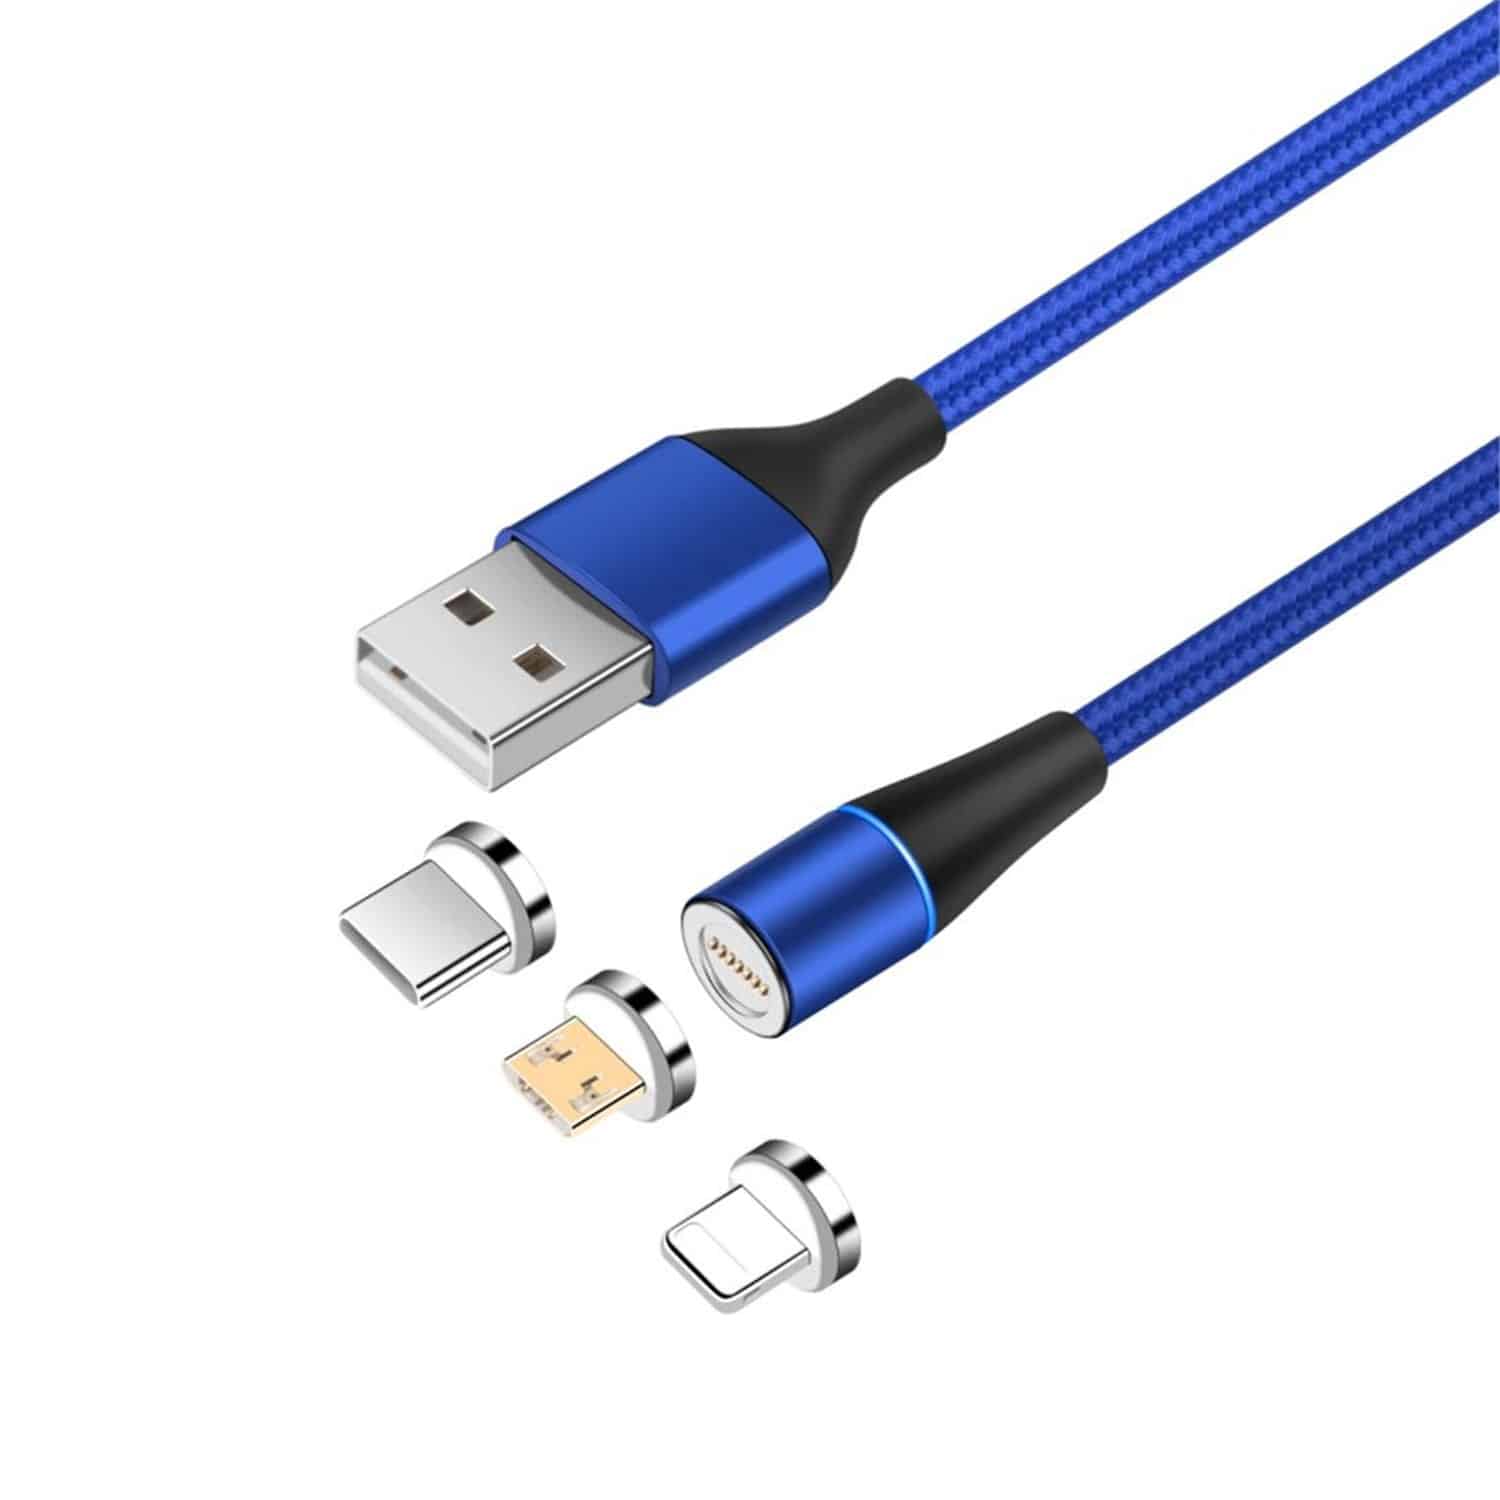 FlinQ-Magnetic-Cable-Charger-USB-0